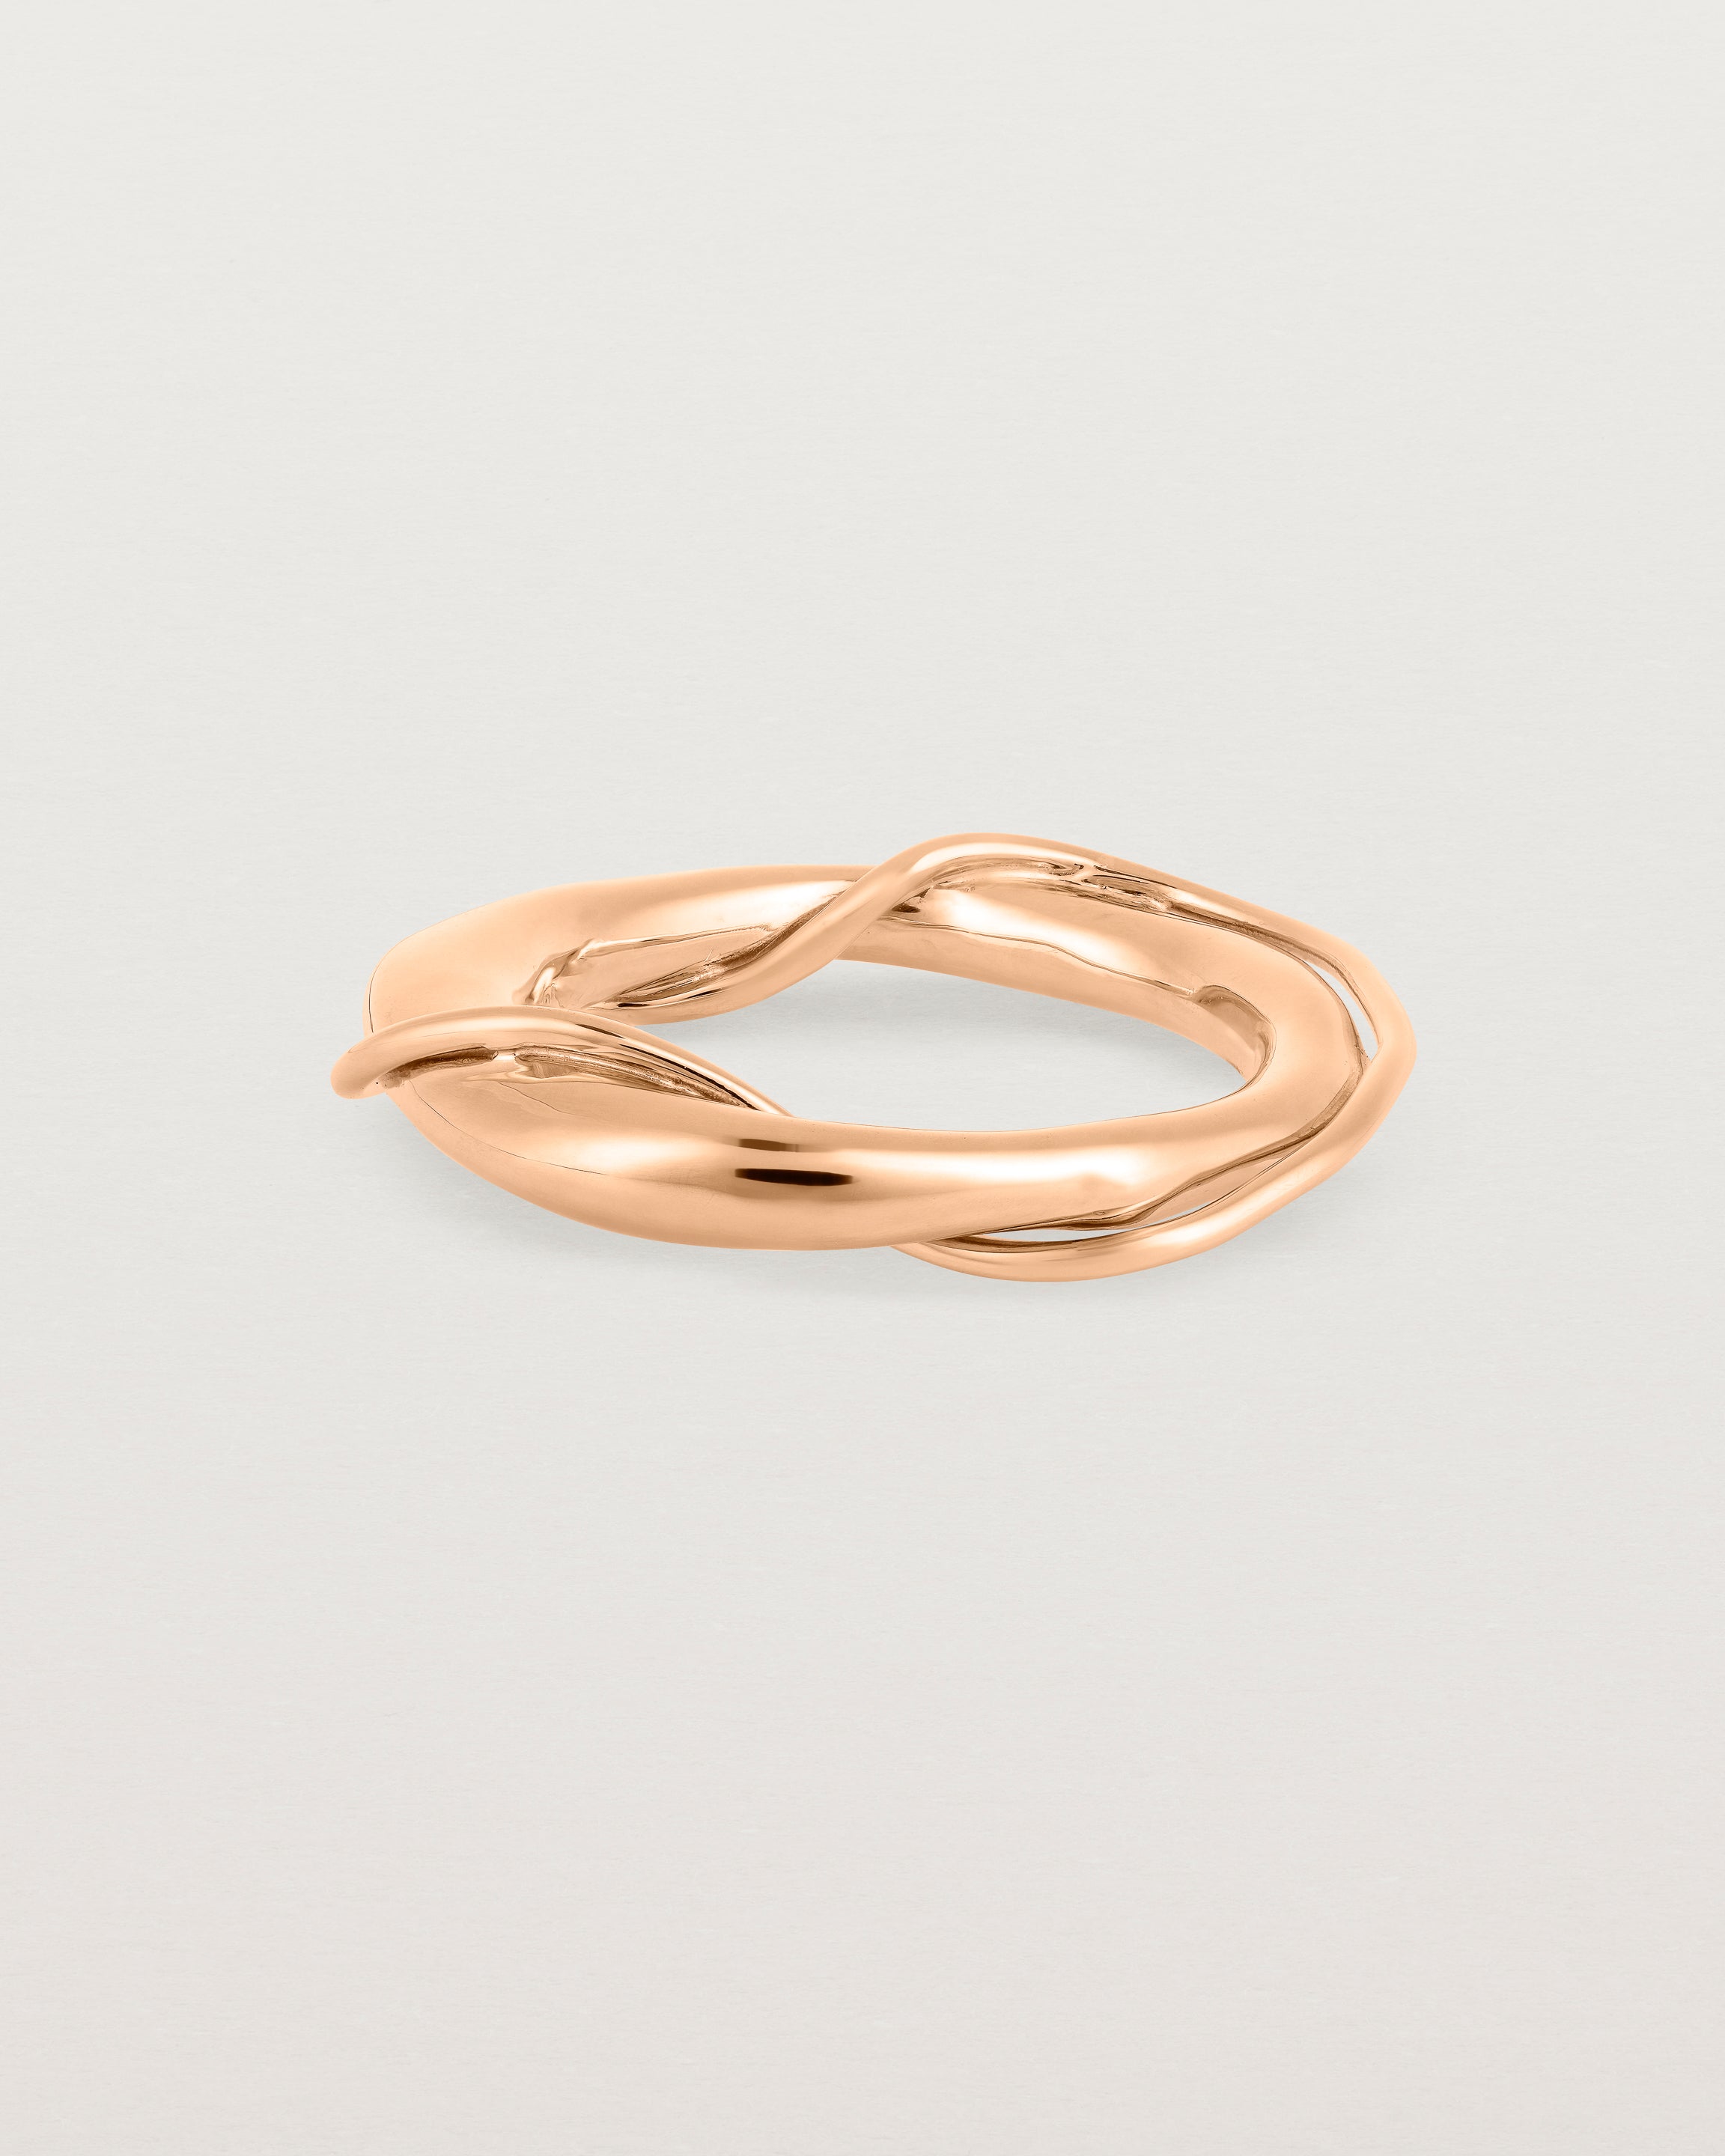 A rose gold ring featuring two entwined metal bands